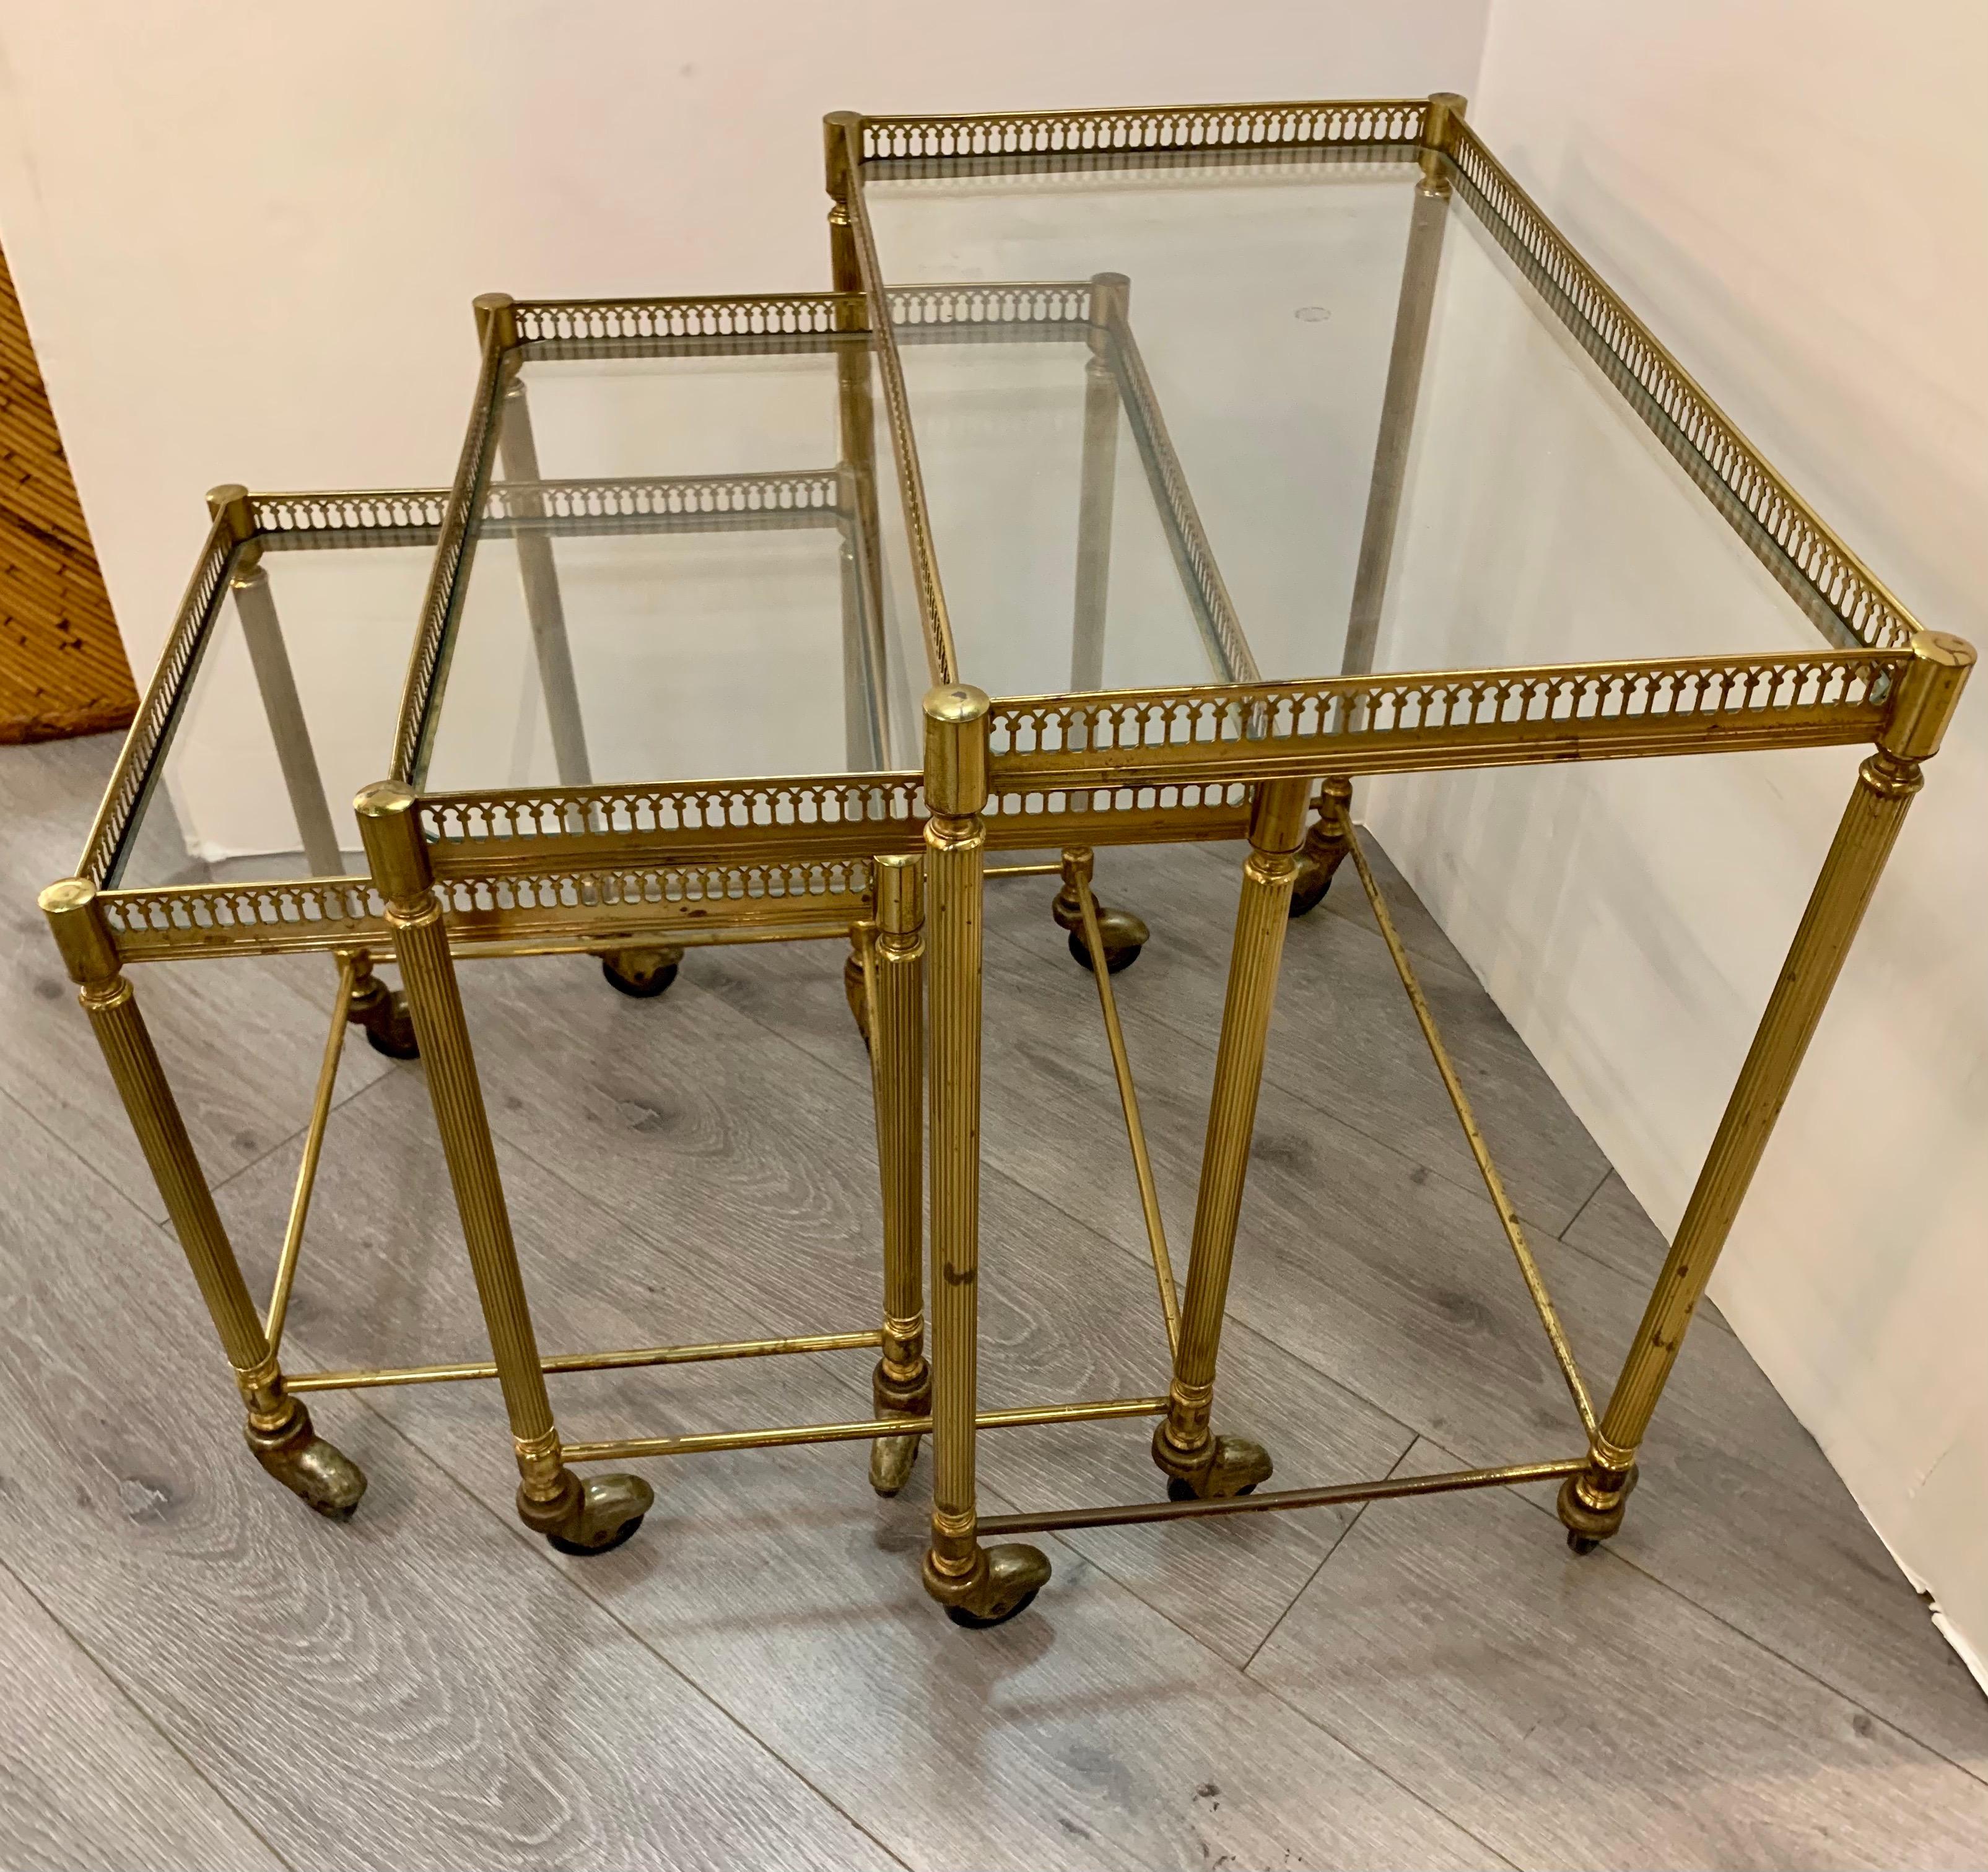 Set of three brass and glass top nesting tables with pierced brass galleries. All three on castors for ease of movement.